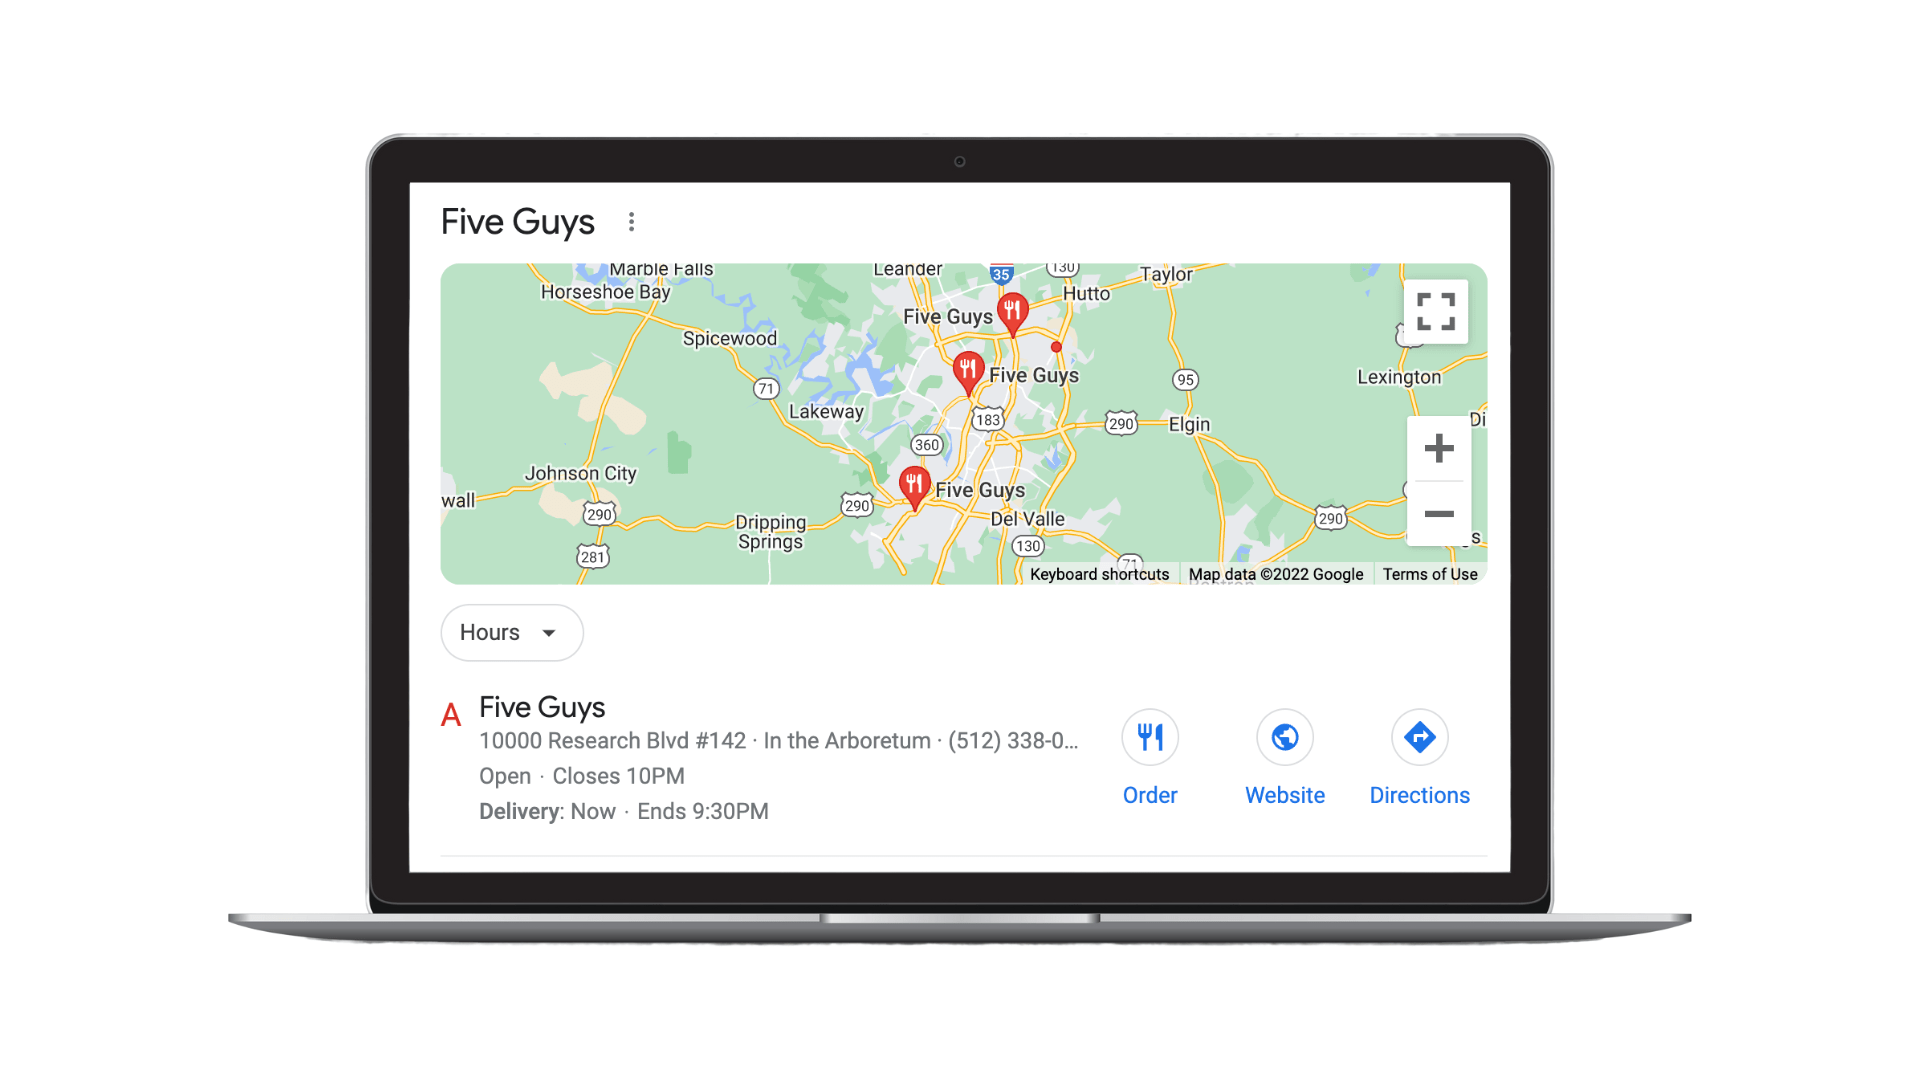 Google Local Pack of Five Guys on a laptop